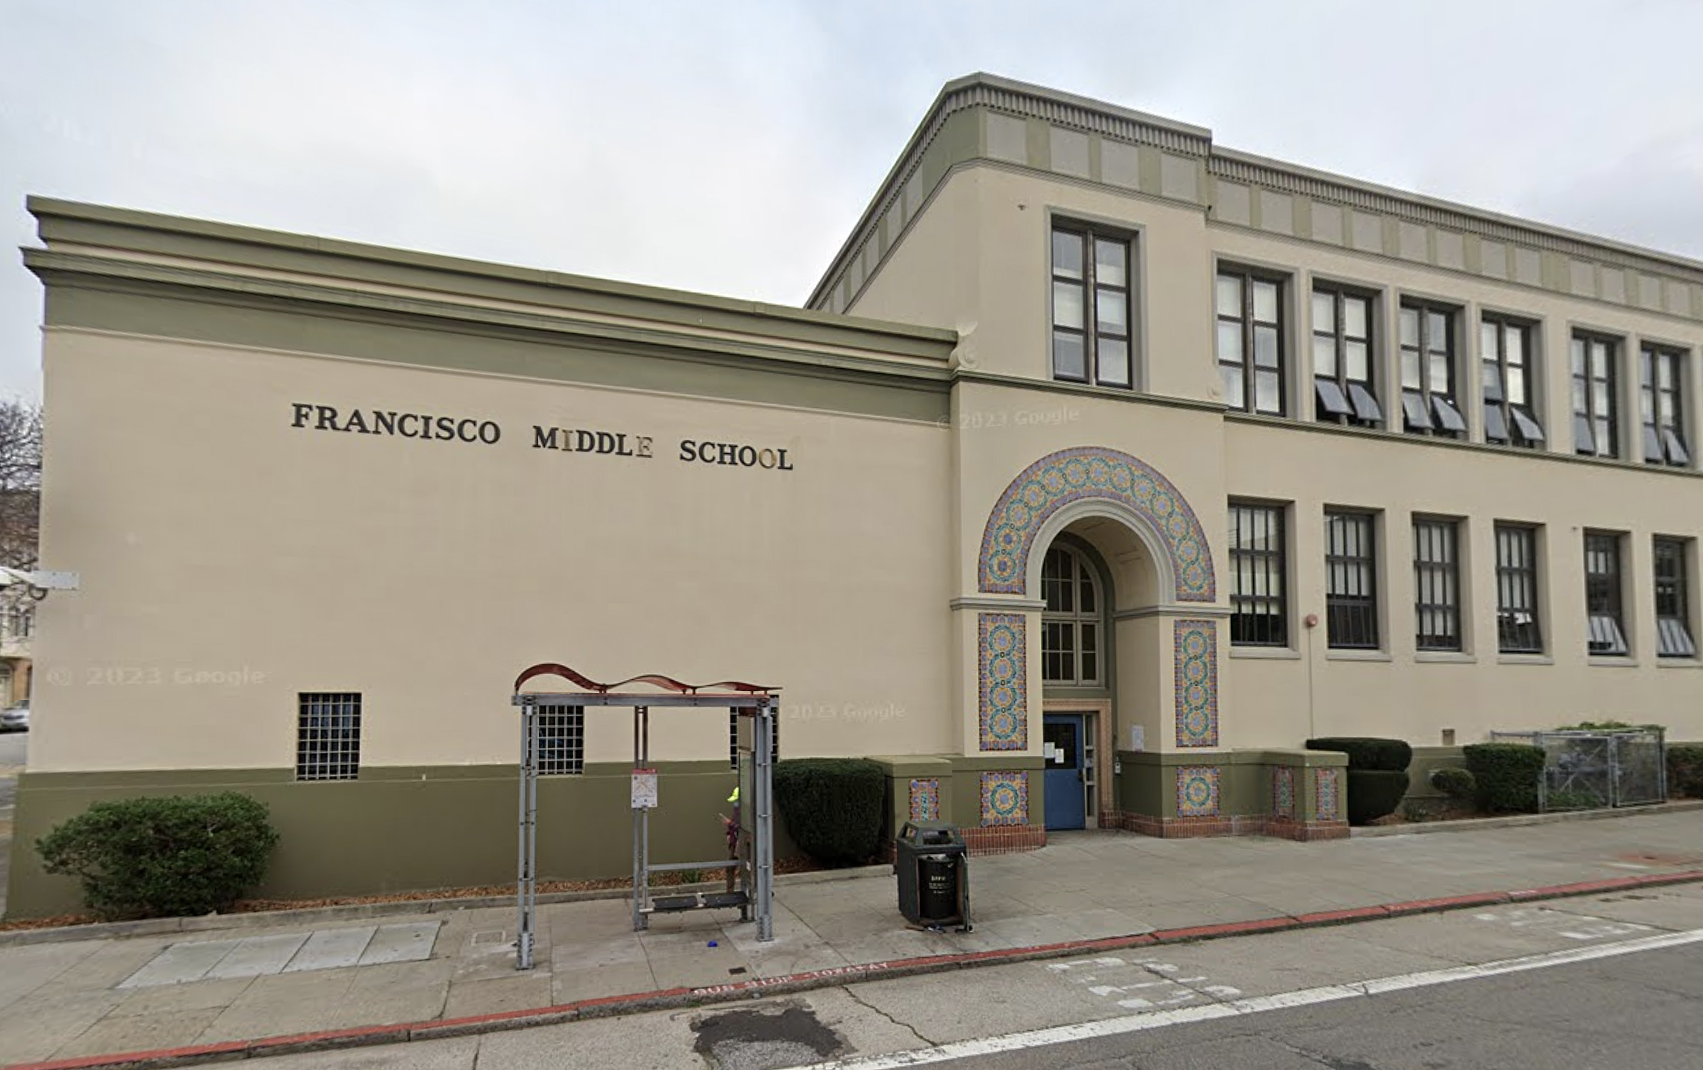 A beige three-story building with "FRANCISCO MIDDLE SCHOOL" written on the side and a decorative arch over the entrance.